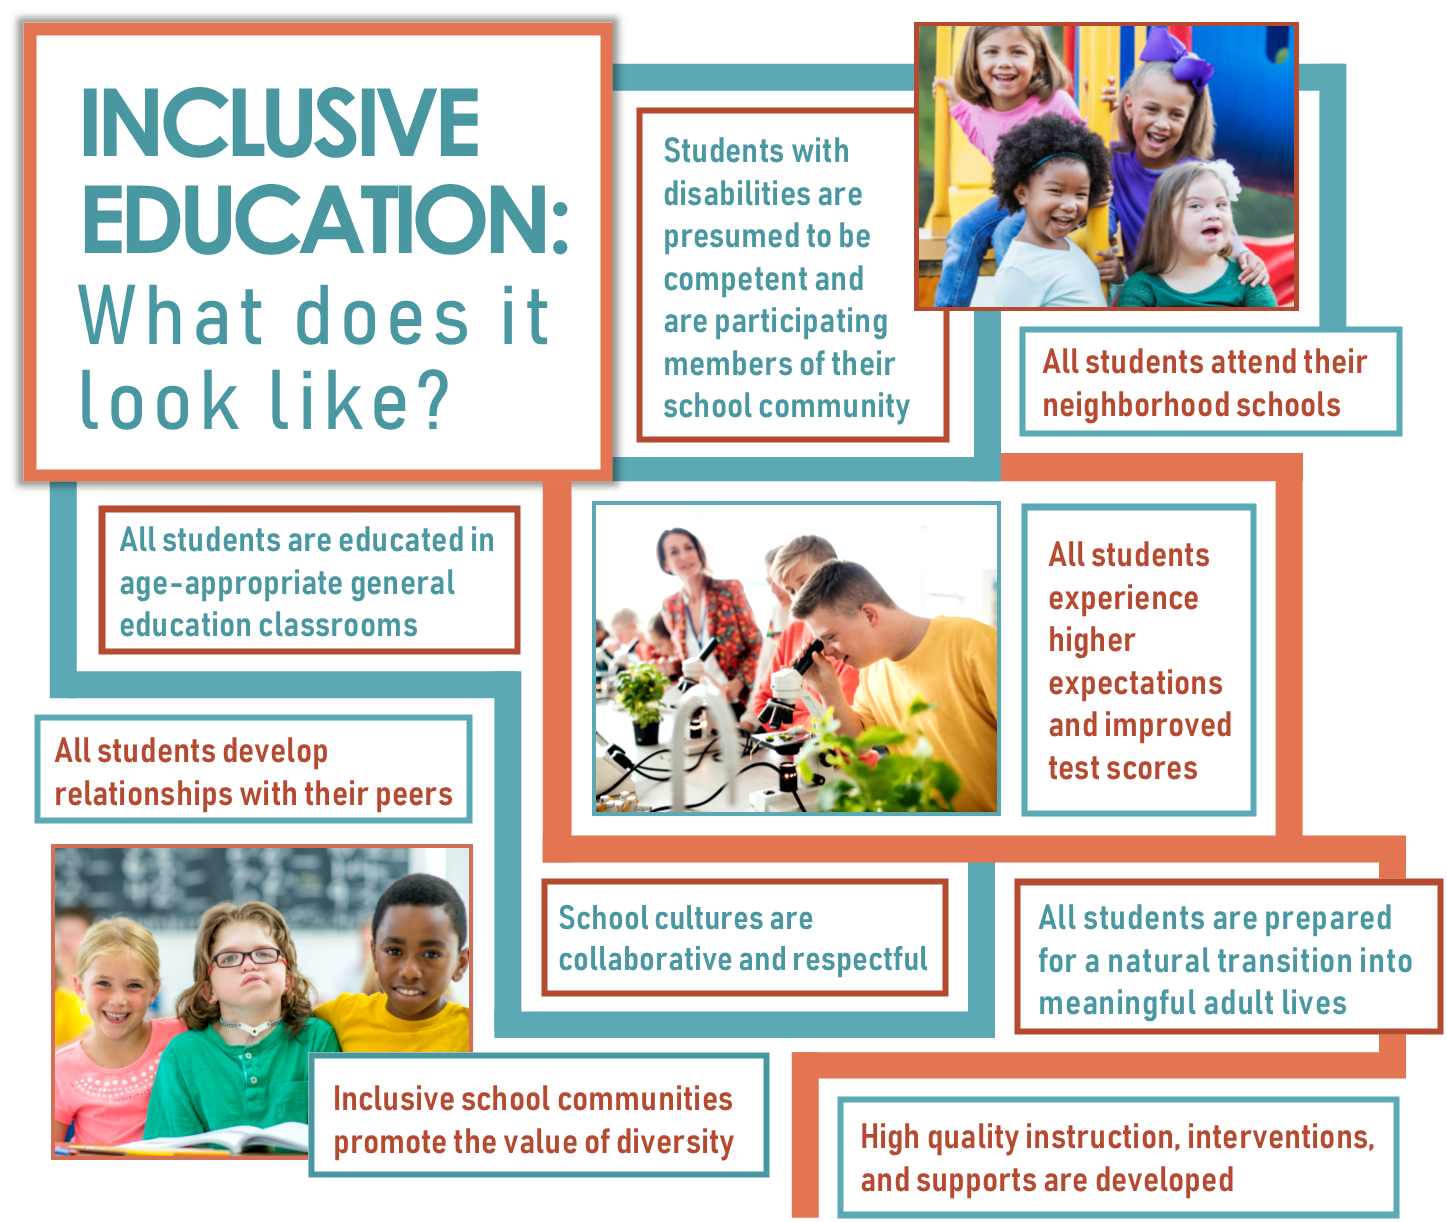 research topics related to inclusive education